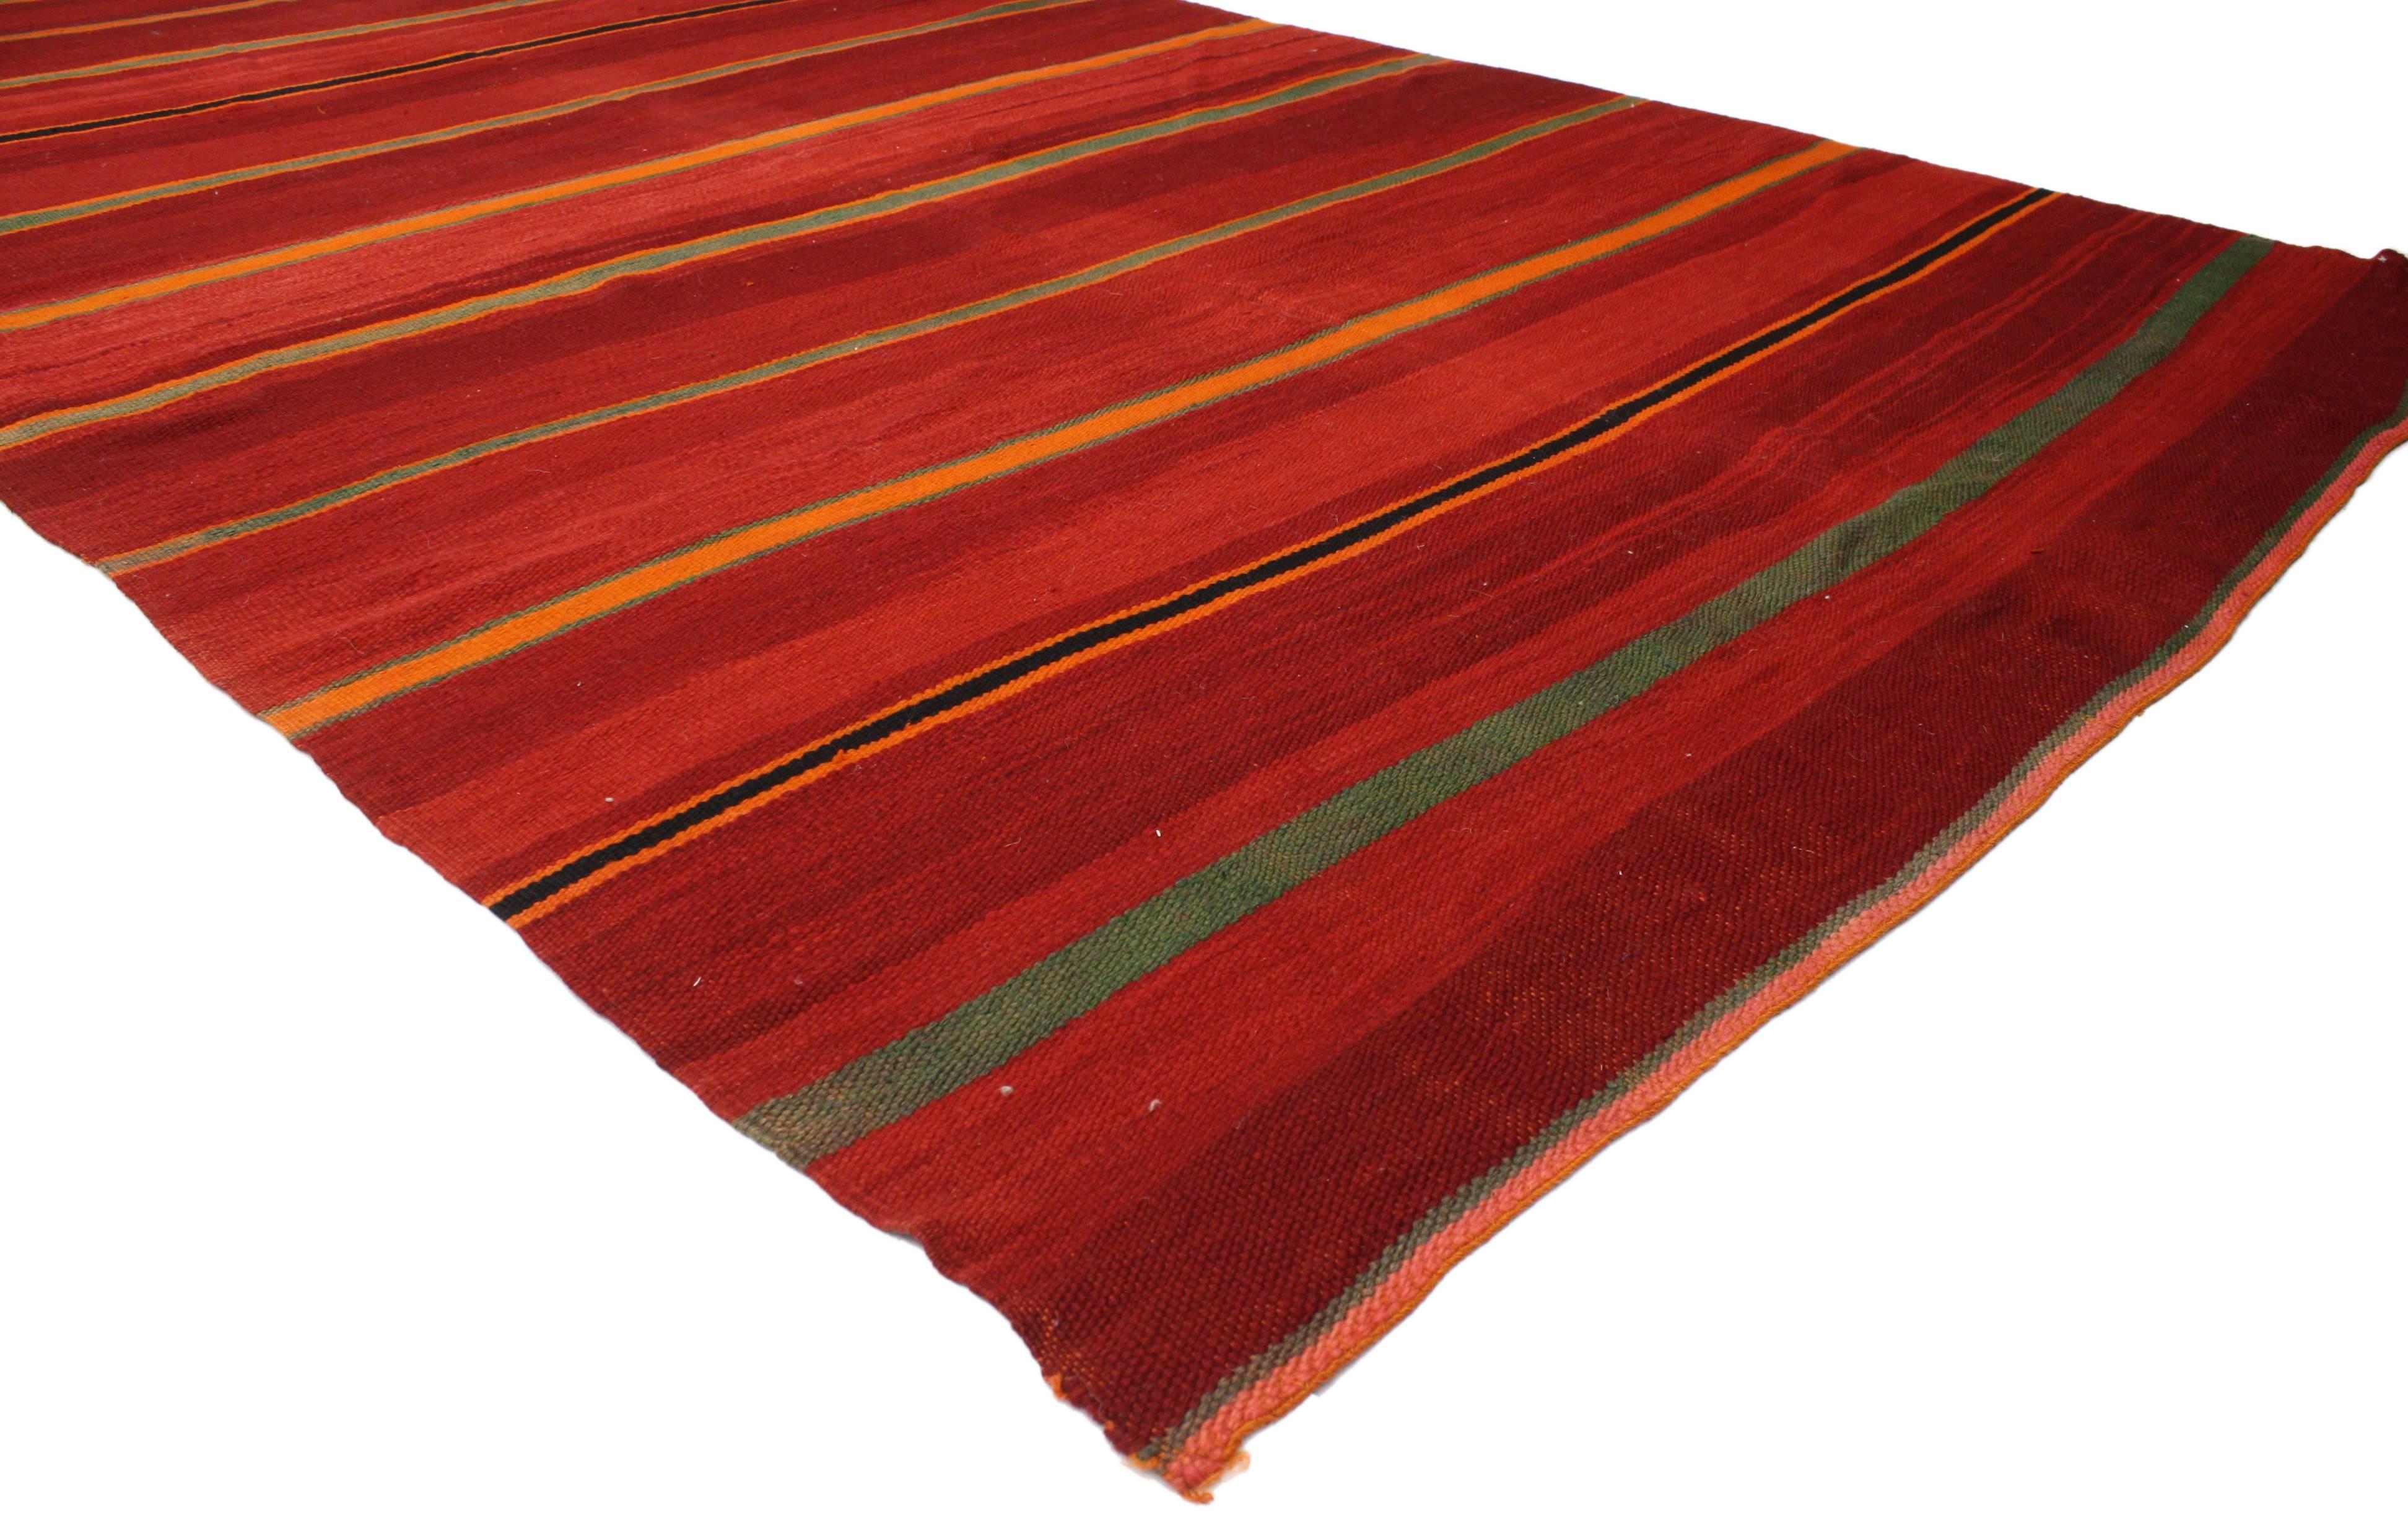 This vintage Berber Moroccan Kilim features a tribal boho chic style, yet it still reflects an understated appearance ideal for modern and contemporary interiors. A series of vibrant colored bands add intrigue and a casual design aesthetic. Rendered